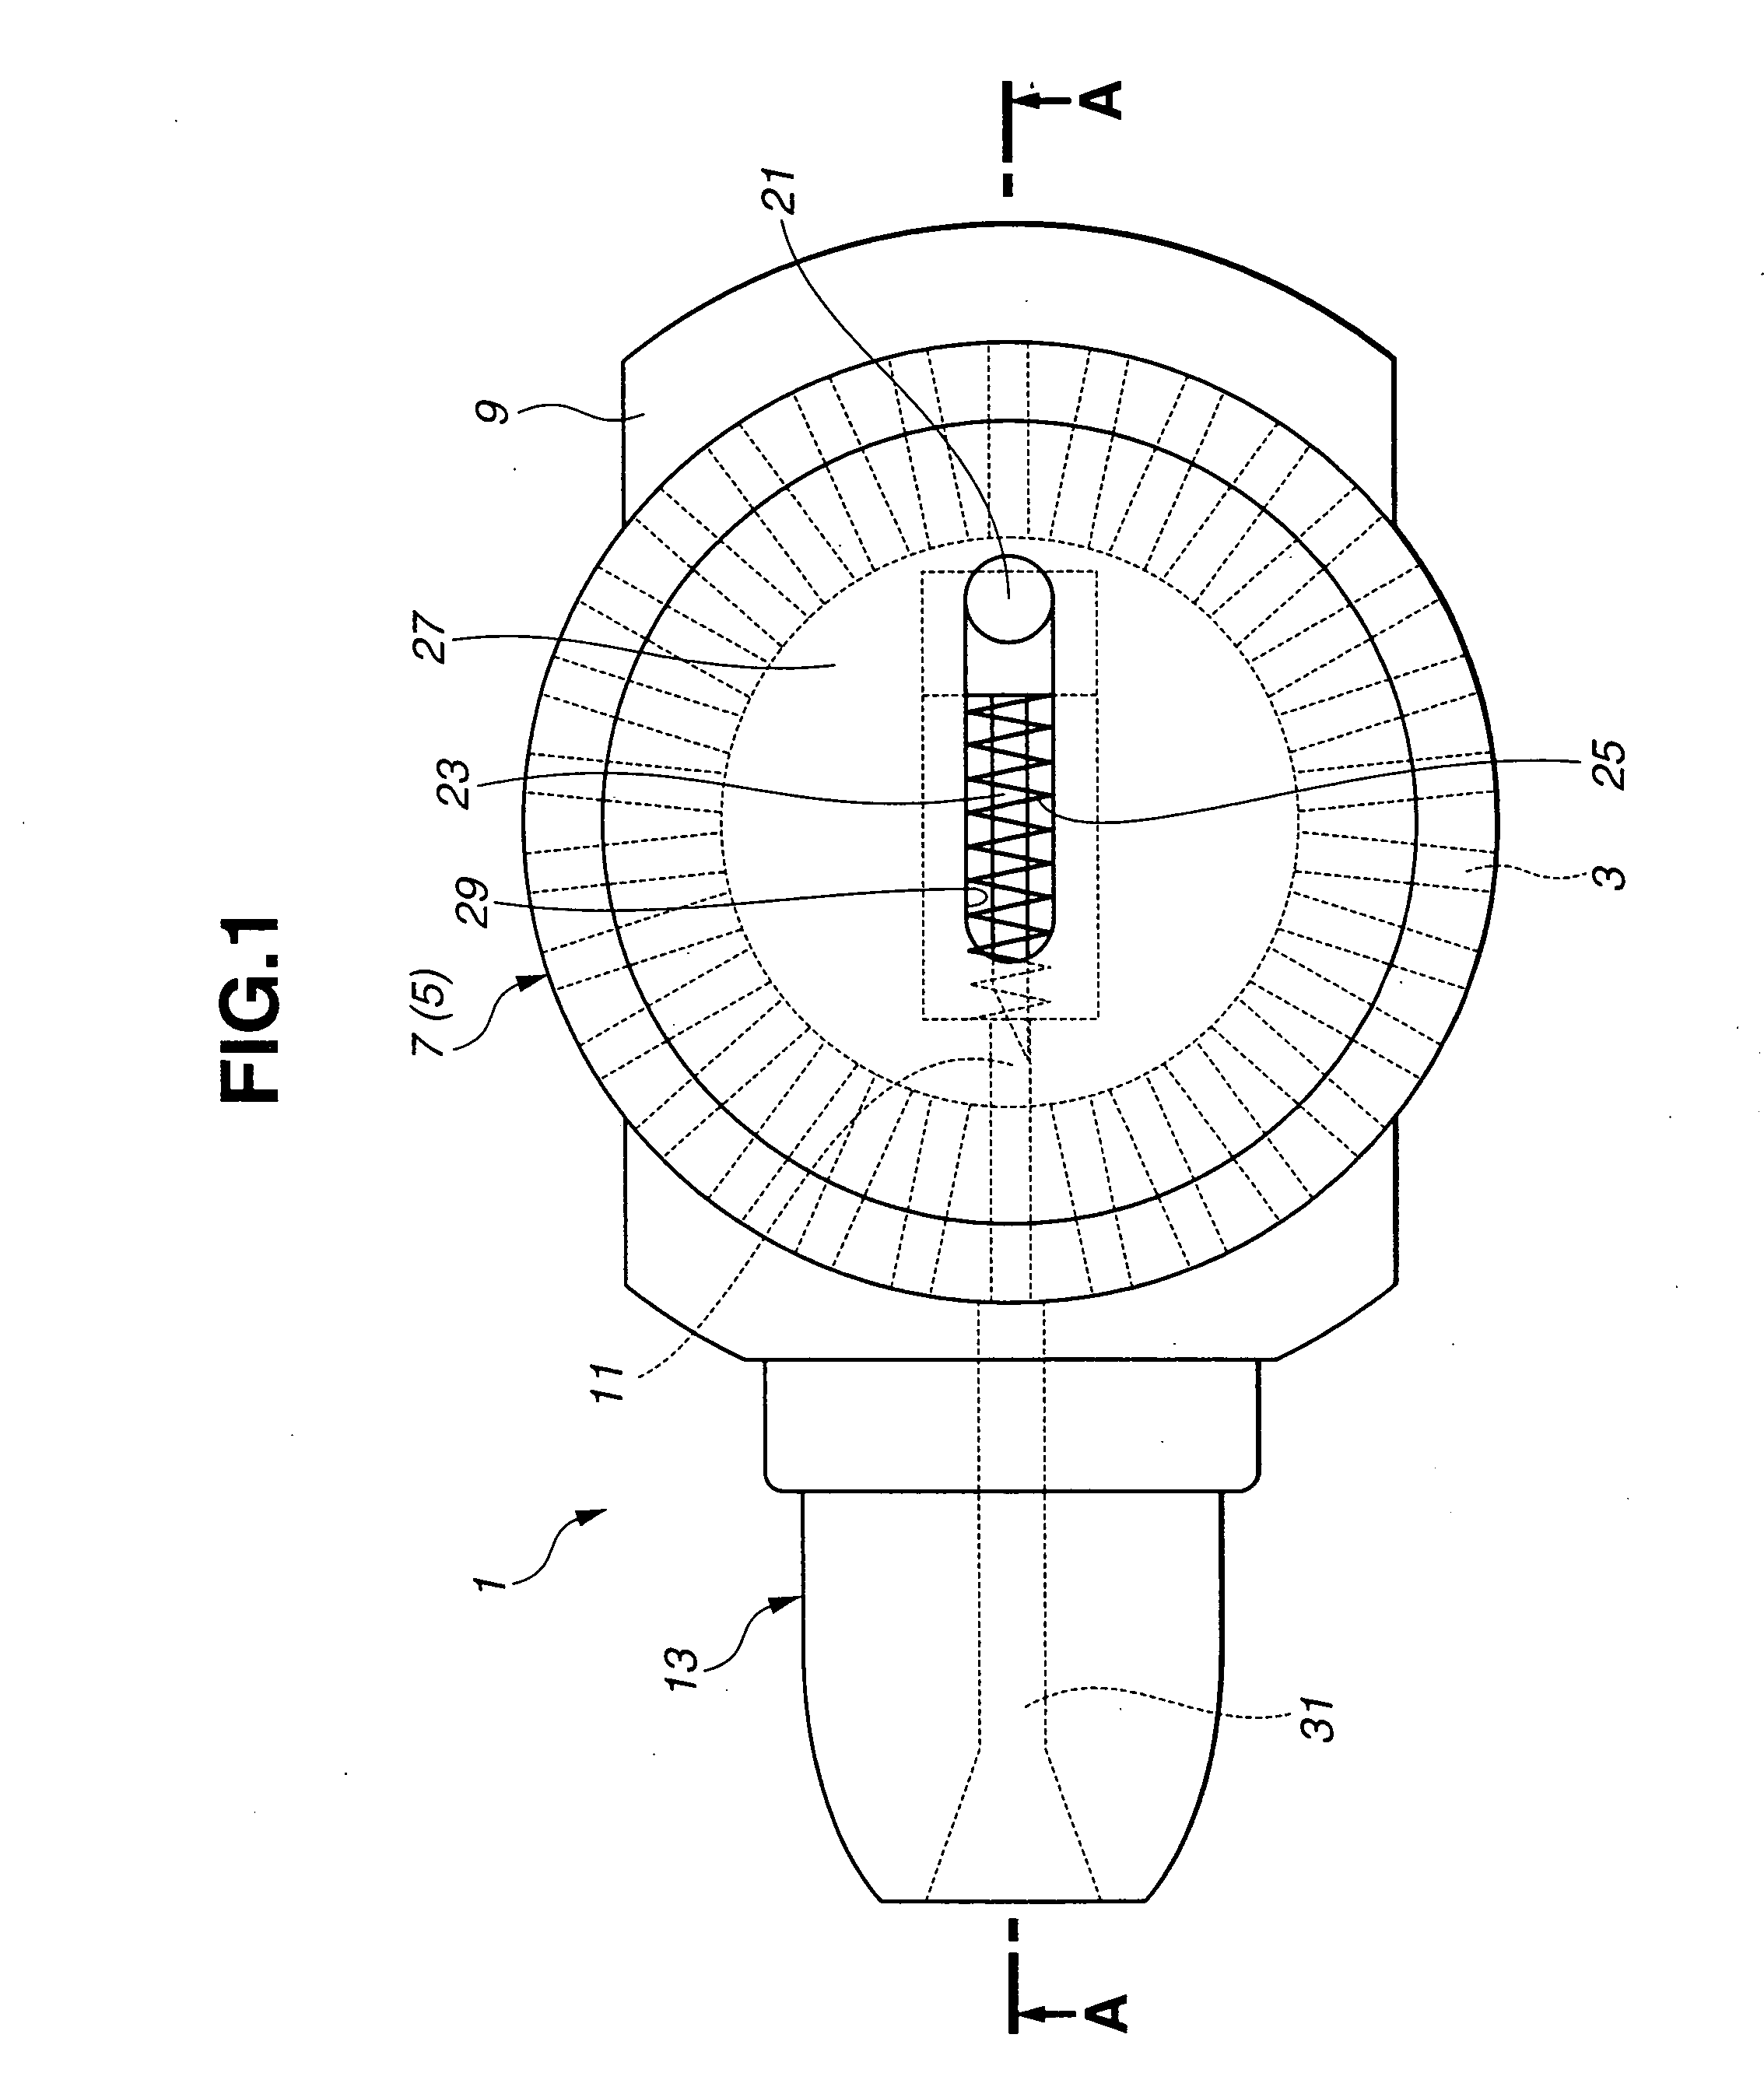 Inhaling type medicine administering apparatus and medicine cartridge used therein